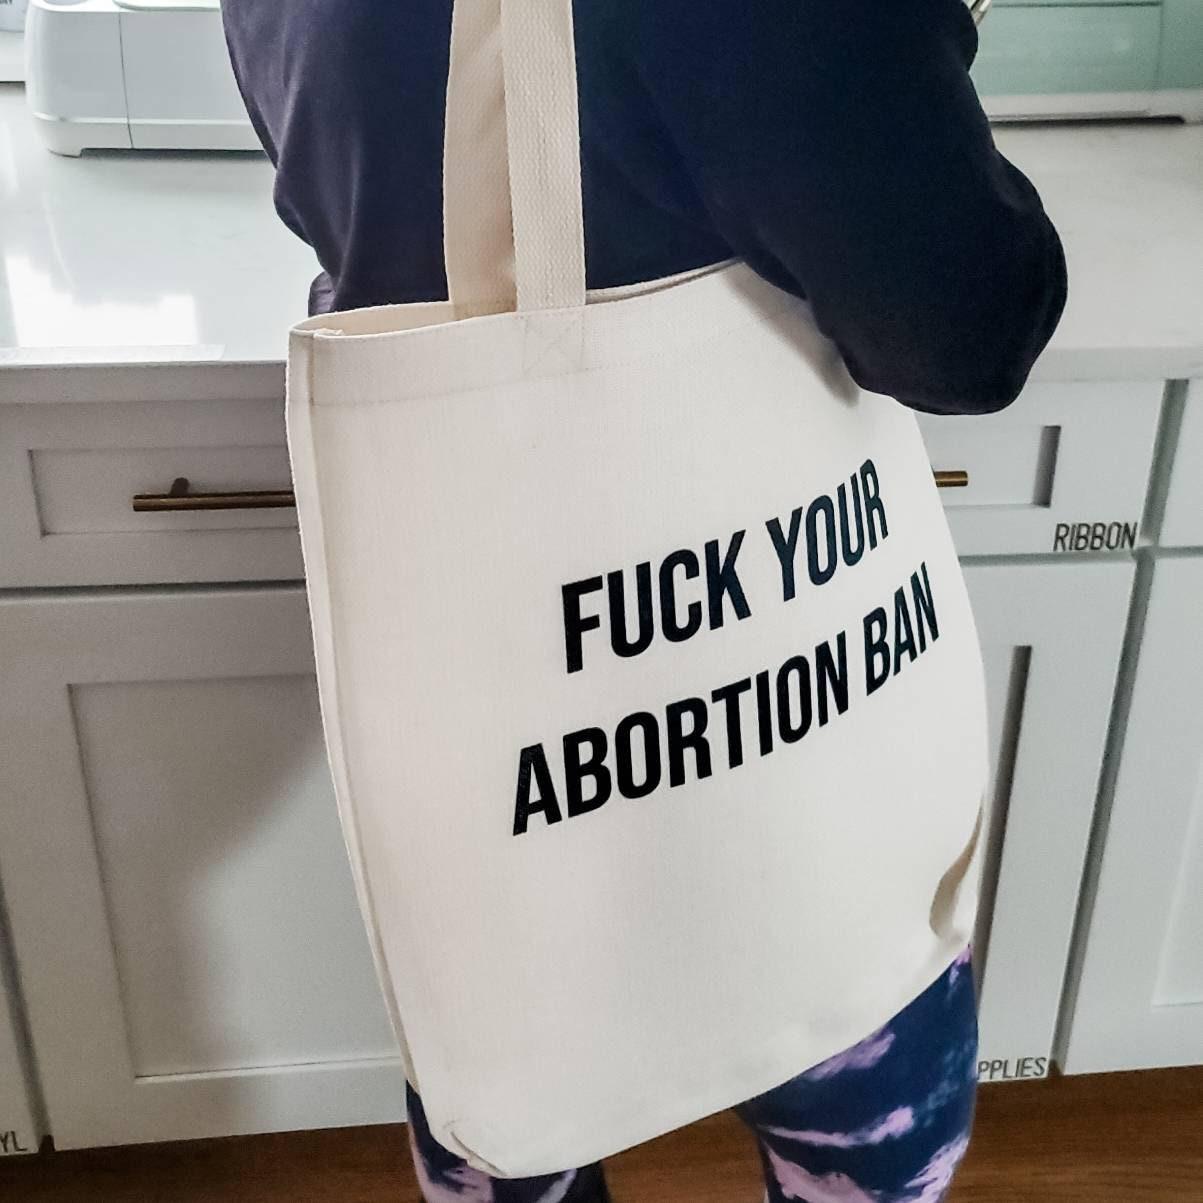 Pro Choice Fourth of July Tote Bag - Abortion Rights Book Bag for College Student - Political Statement Feminist Grocery Bag for Anti July 4